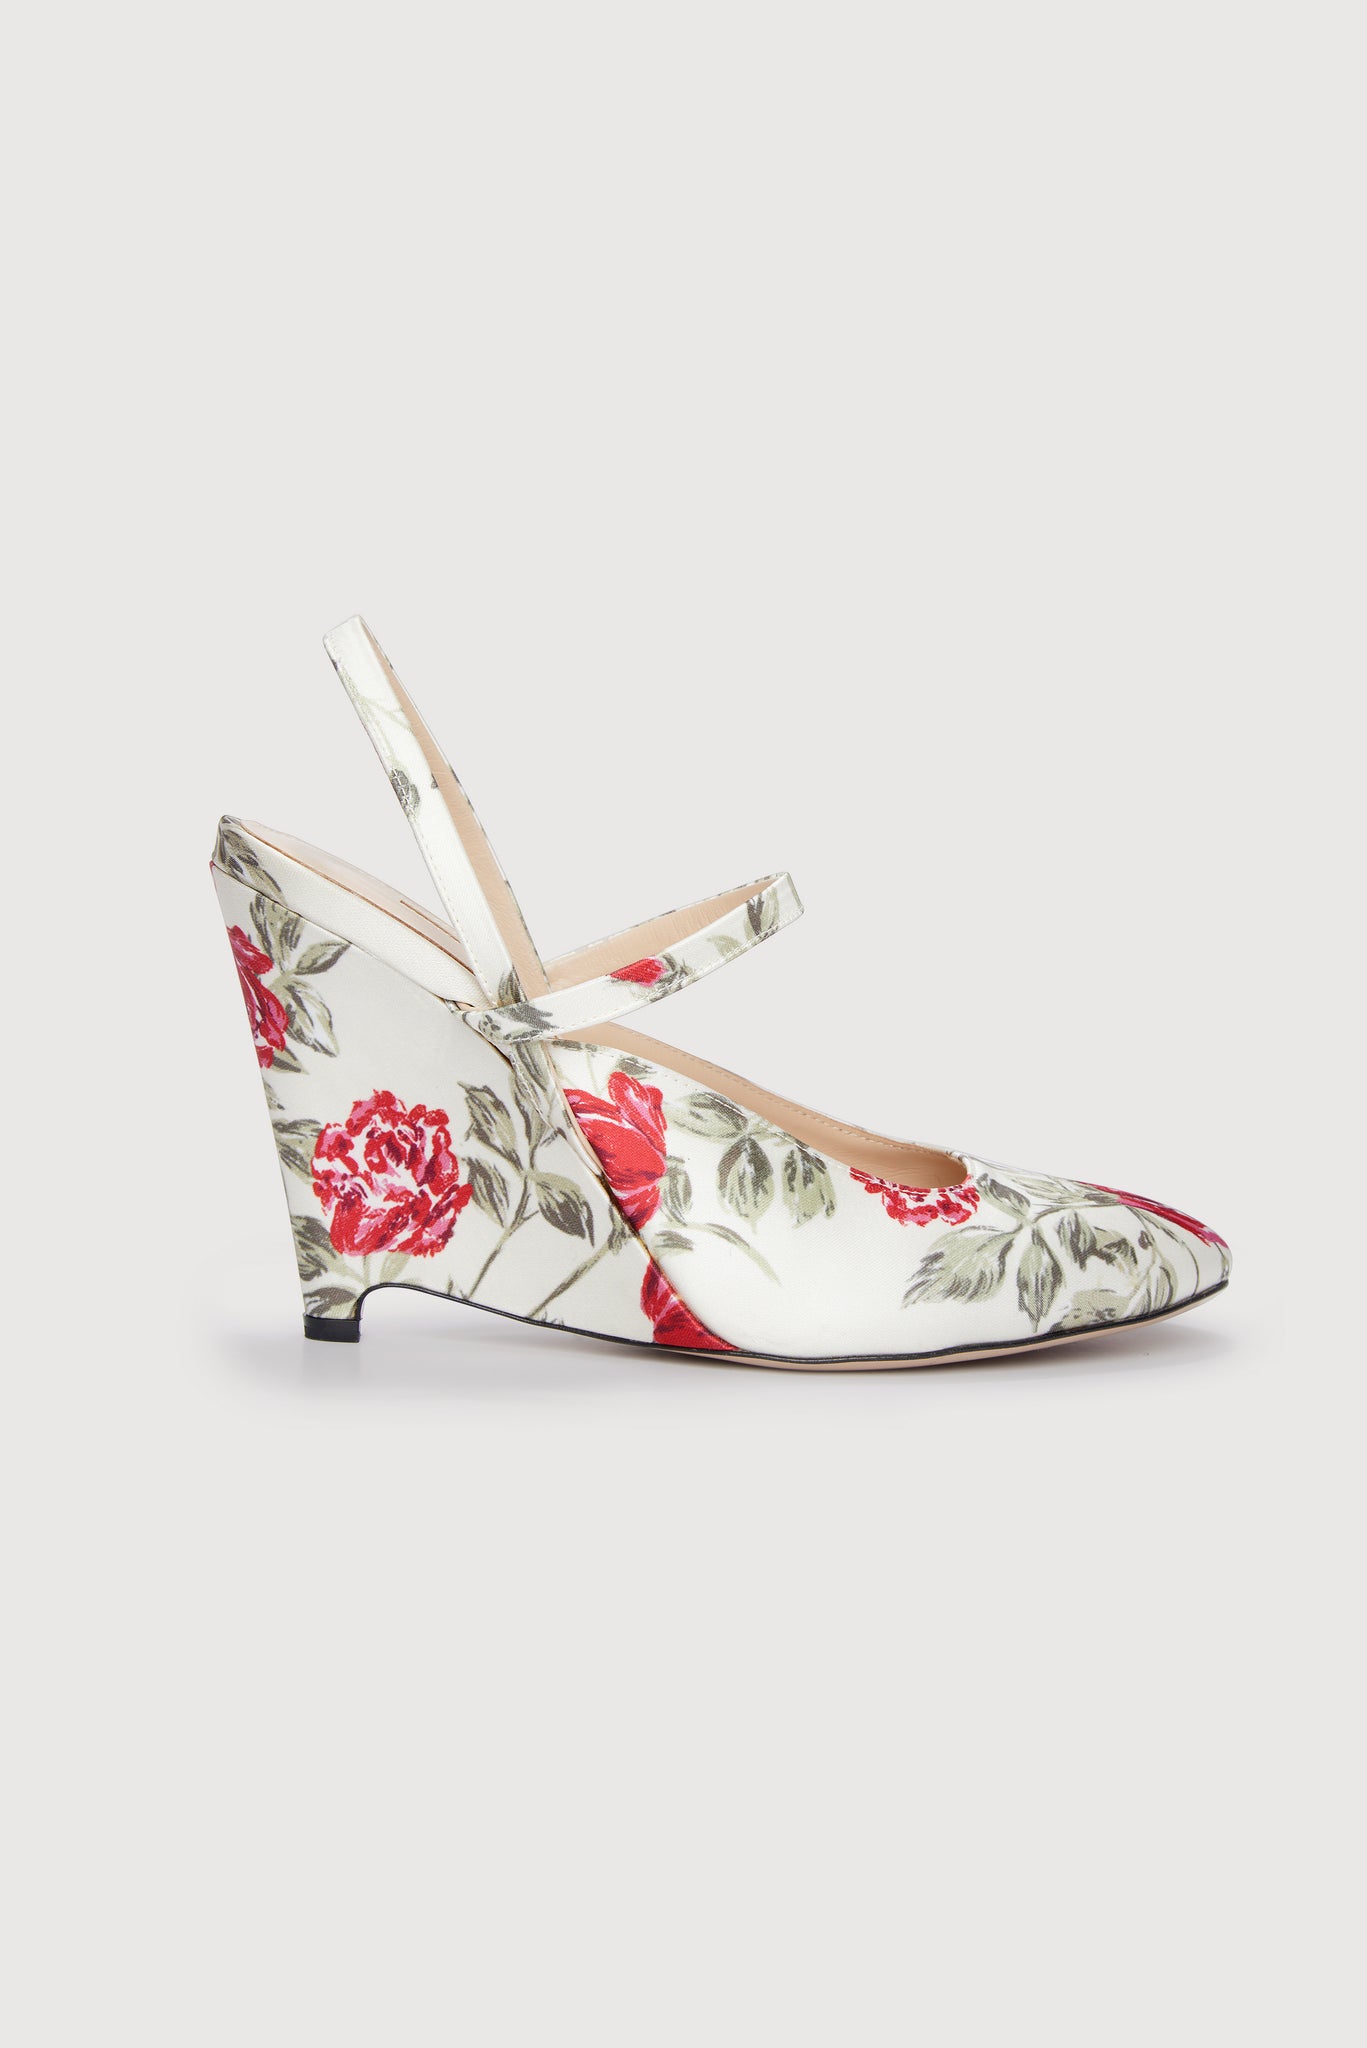 Aster Red Rose on Ivory Satin Floral Printed Wedge Shoes | Emilia Wickstead